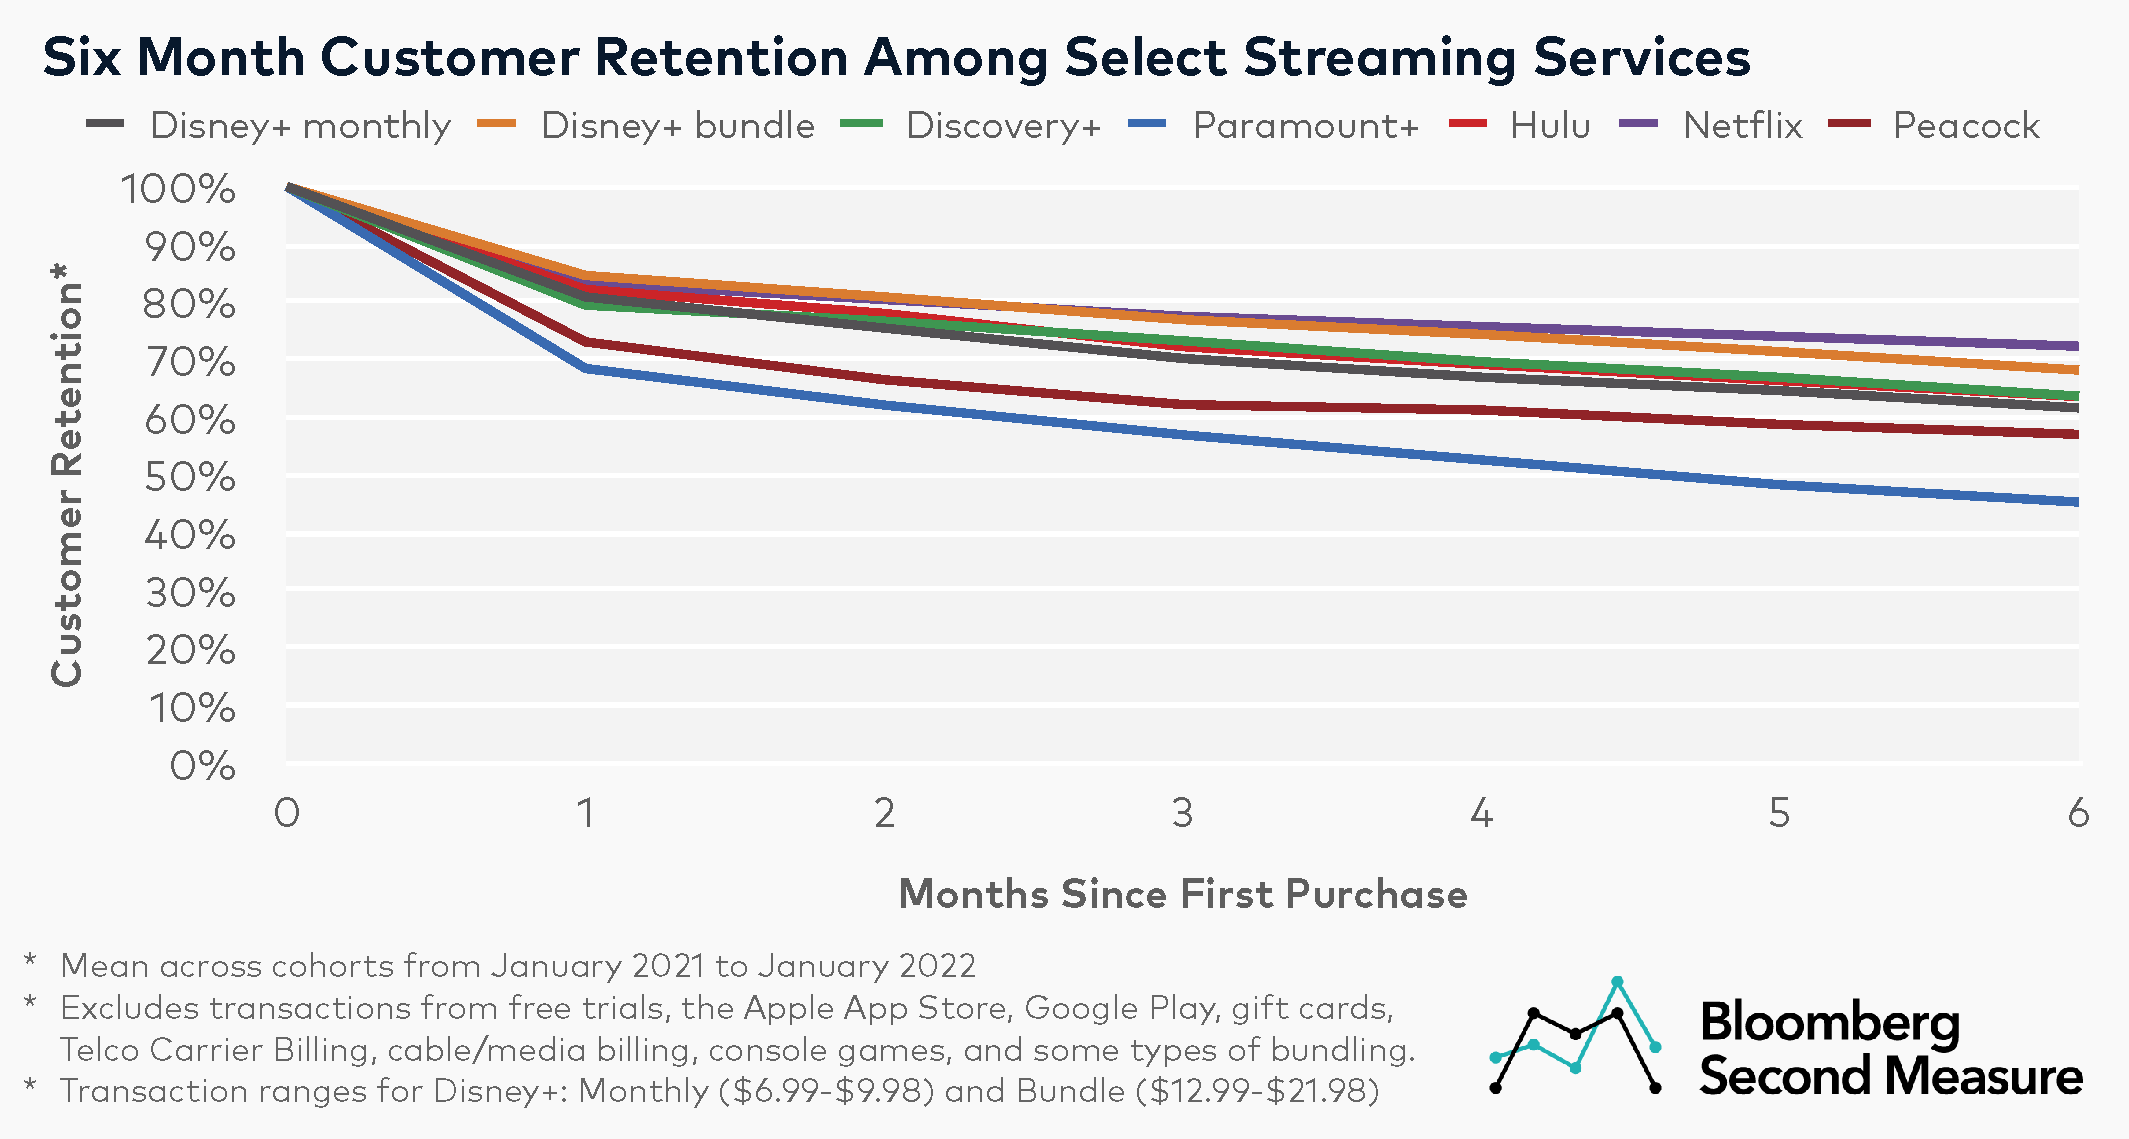 Streaming services see slightly higher customer retention with ad-free plans  - Bloomberg Second Measure